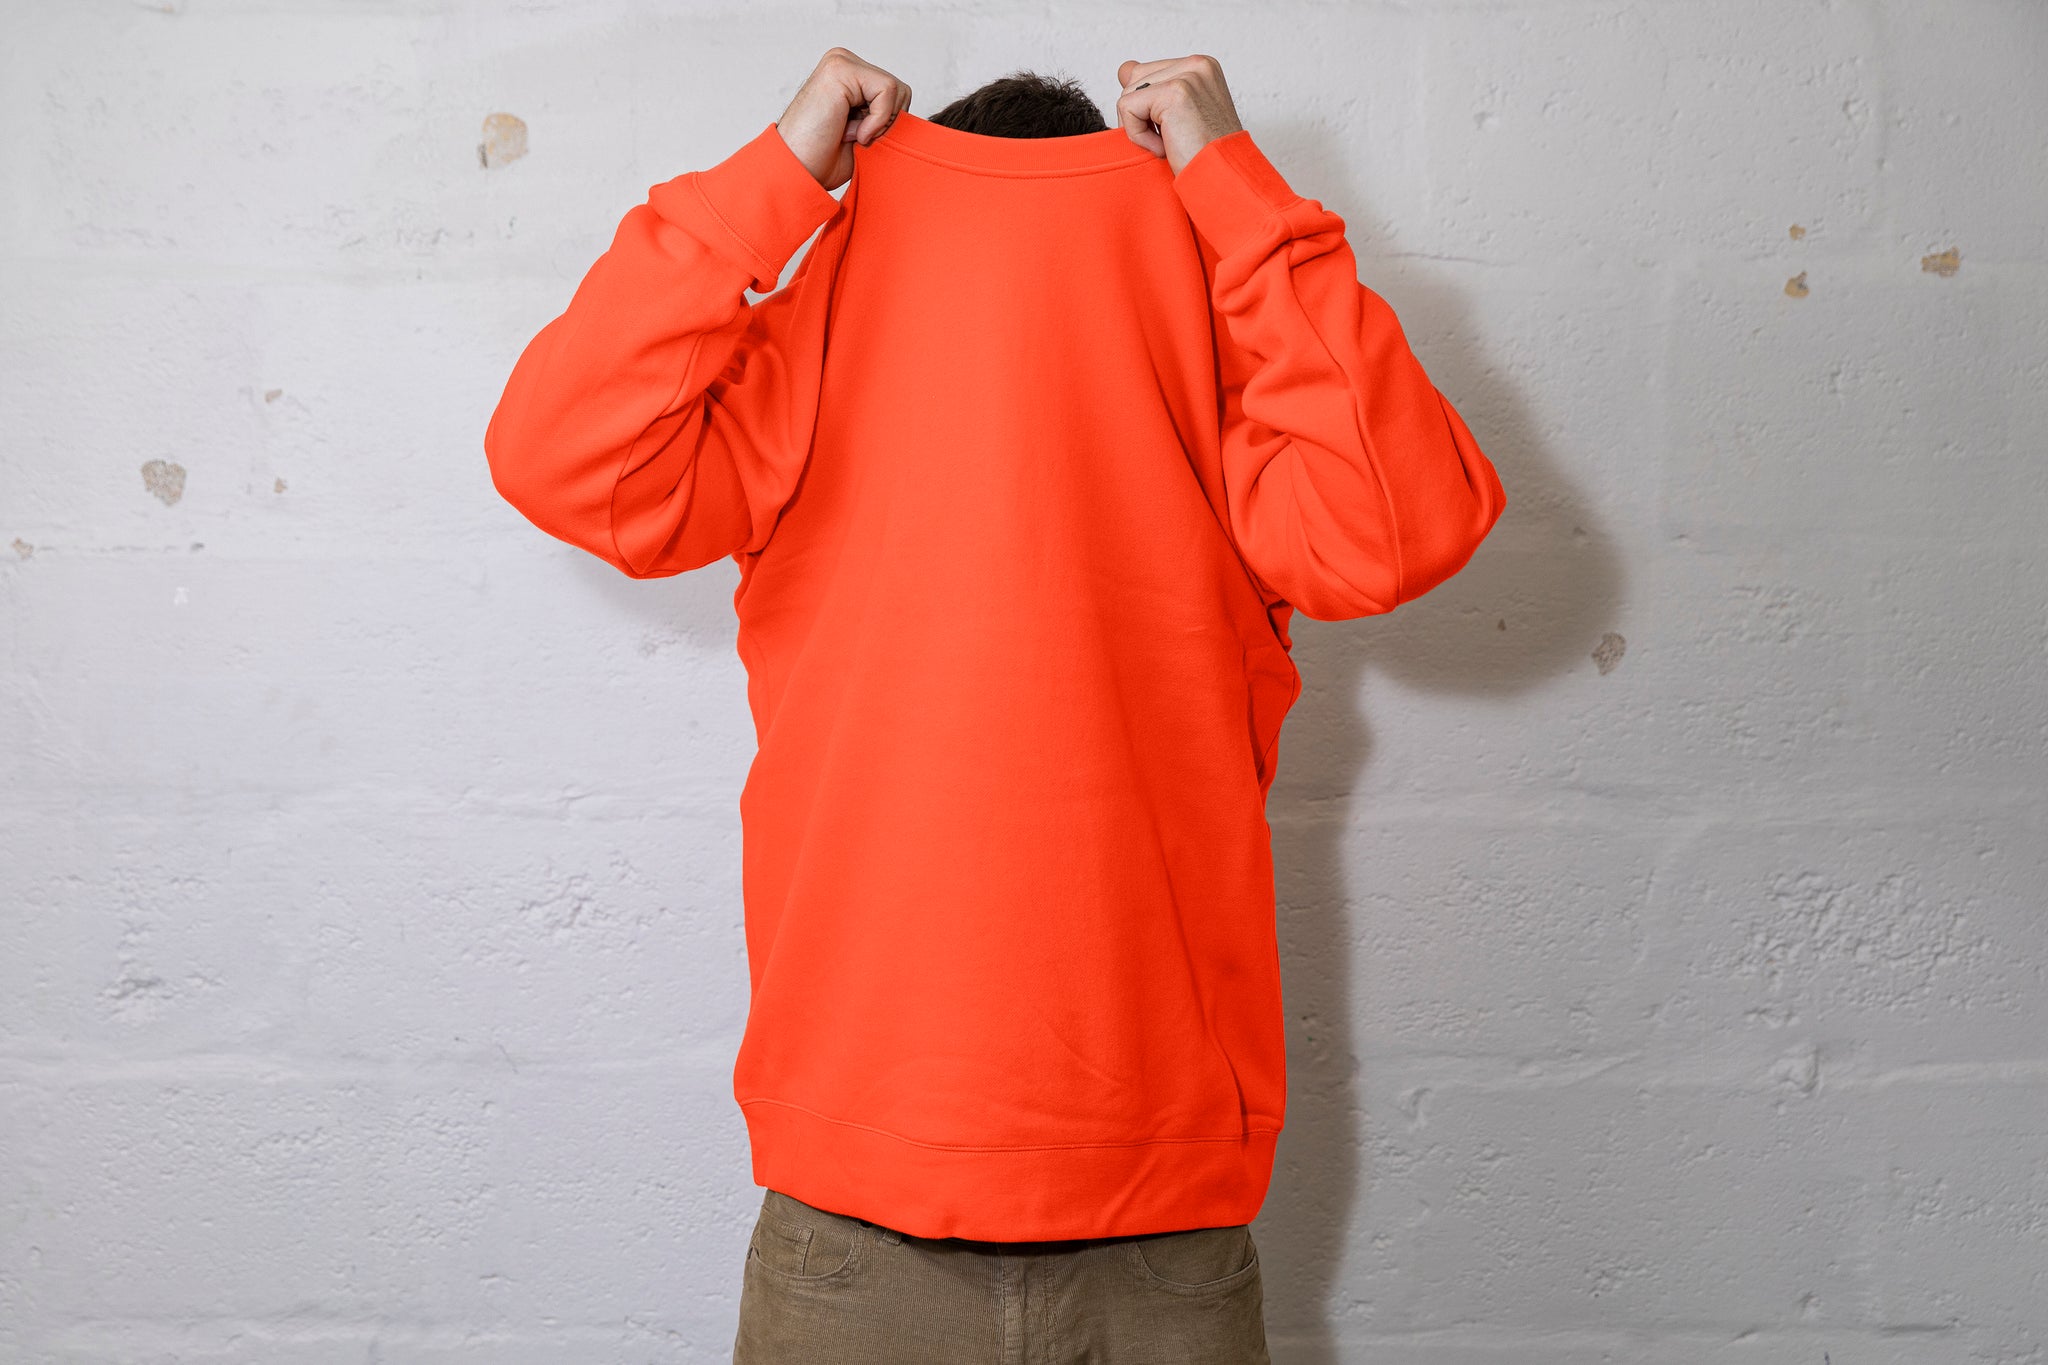 Person pulling a large orange jumper over their head. Can see the top of their dark hair. White cinderbock background. 